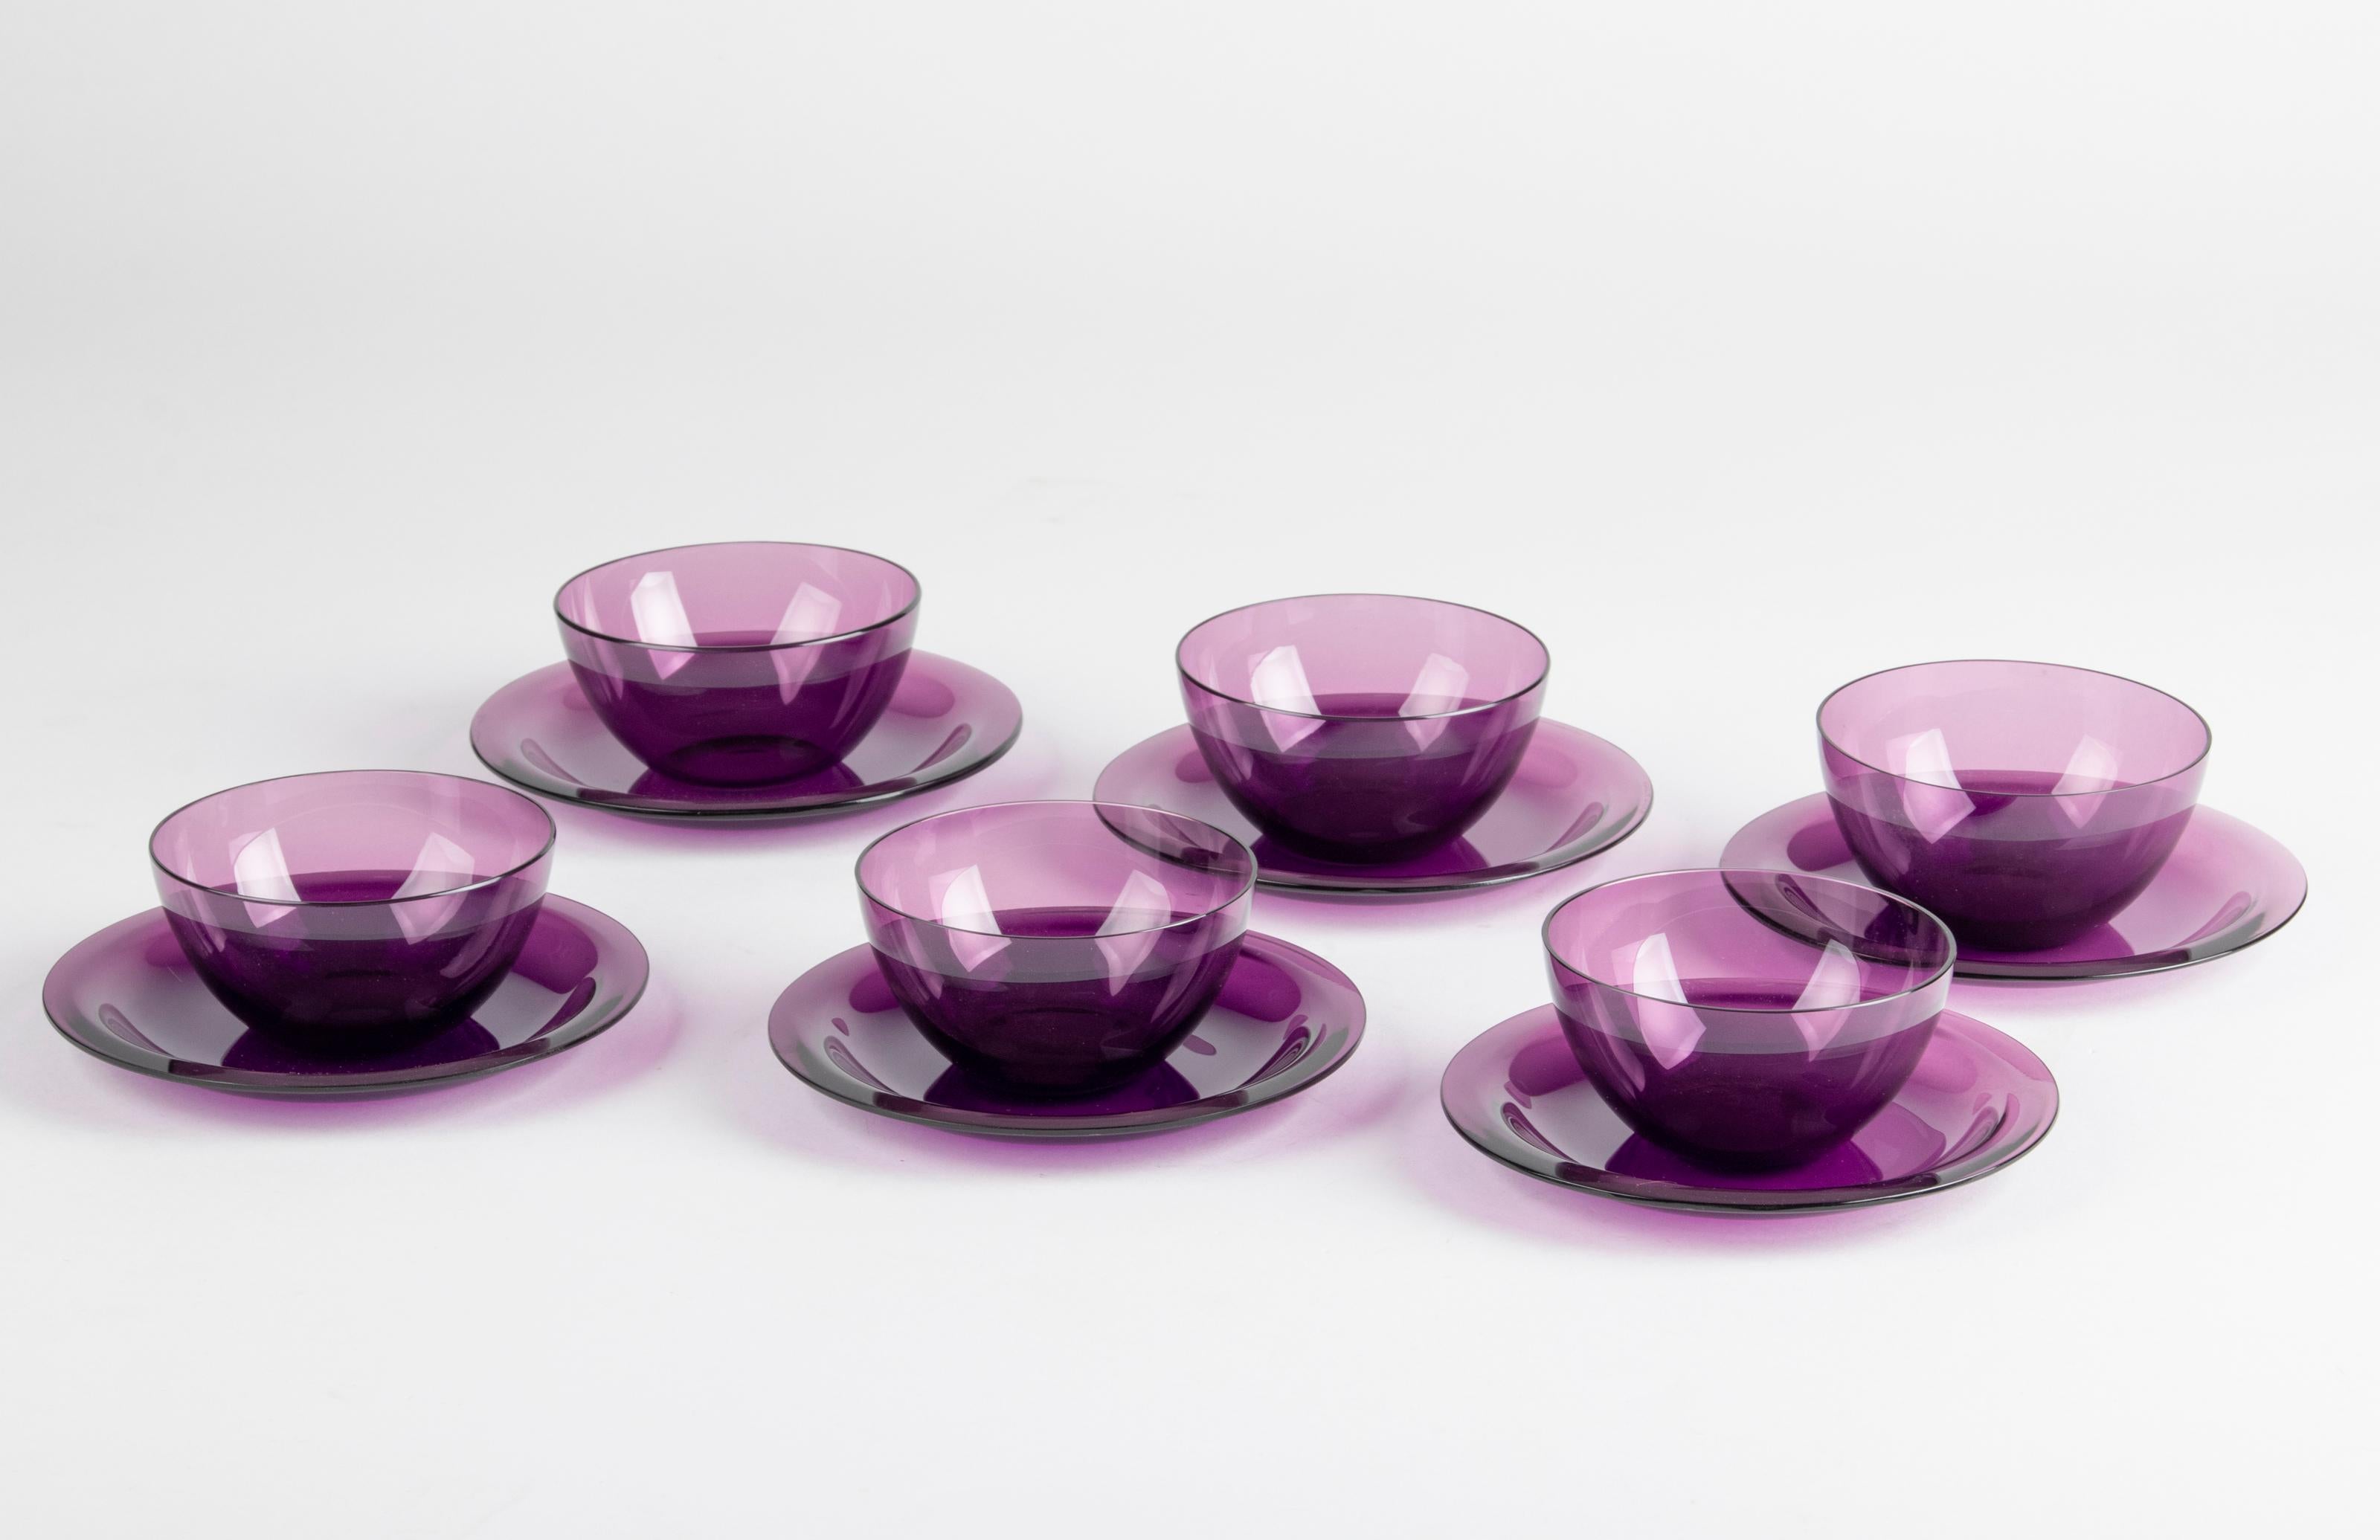 Hand-Crafted Set of 6 Crystal Fruitbowls with Saucers by Lalique France